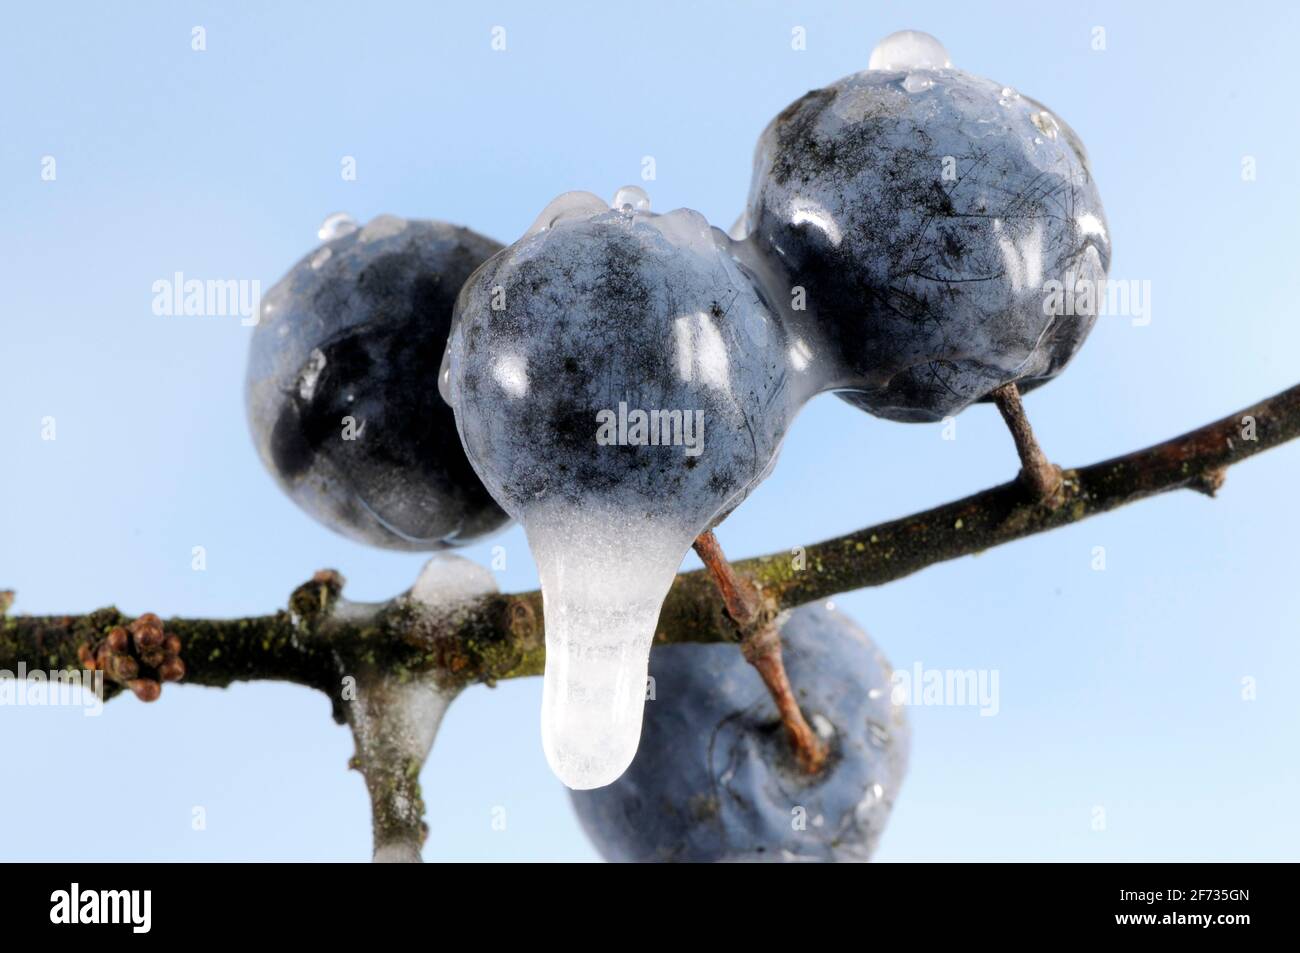 Blackthorn (Prunus spinosa), berries with ice Stock Photo